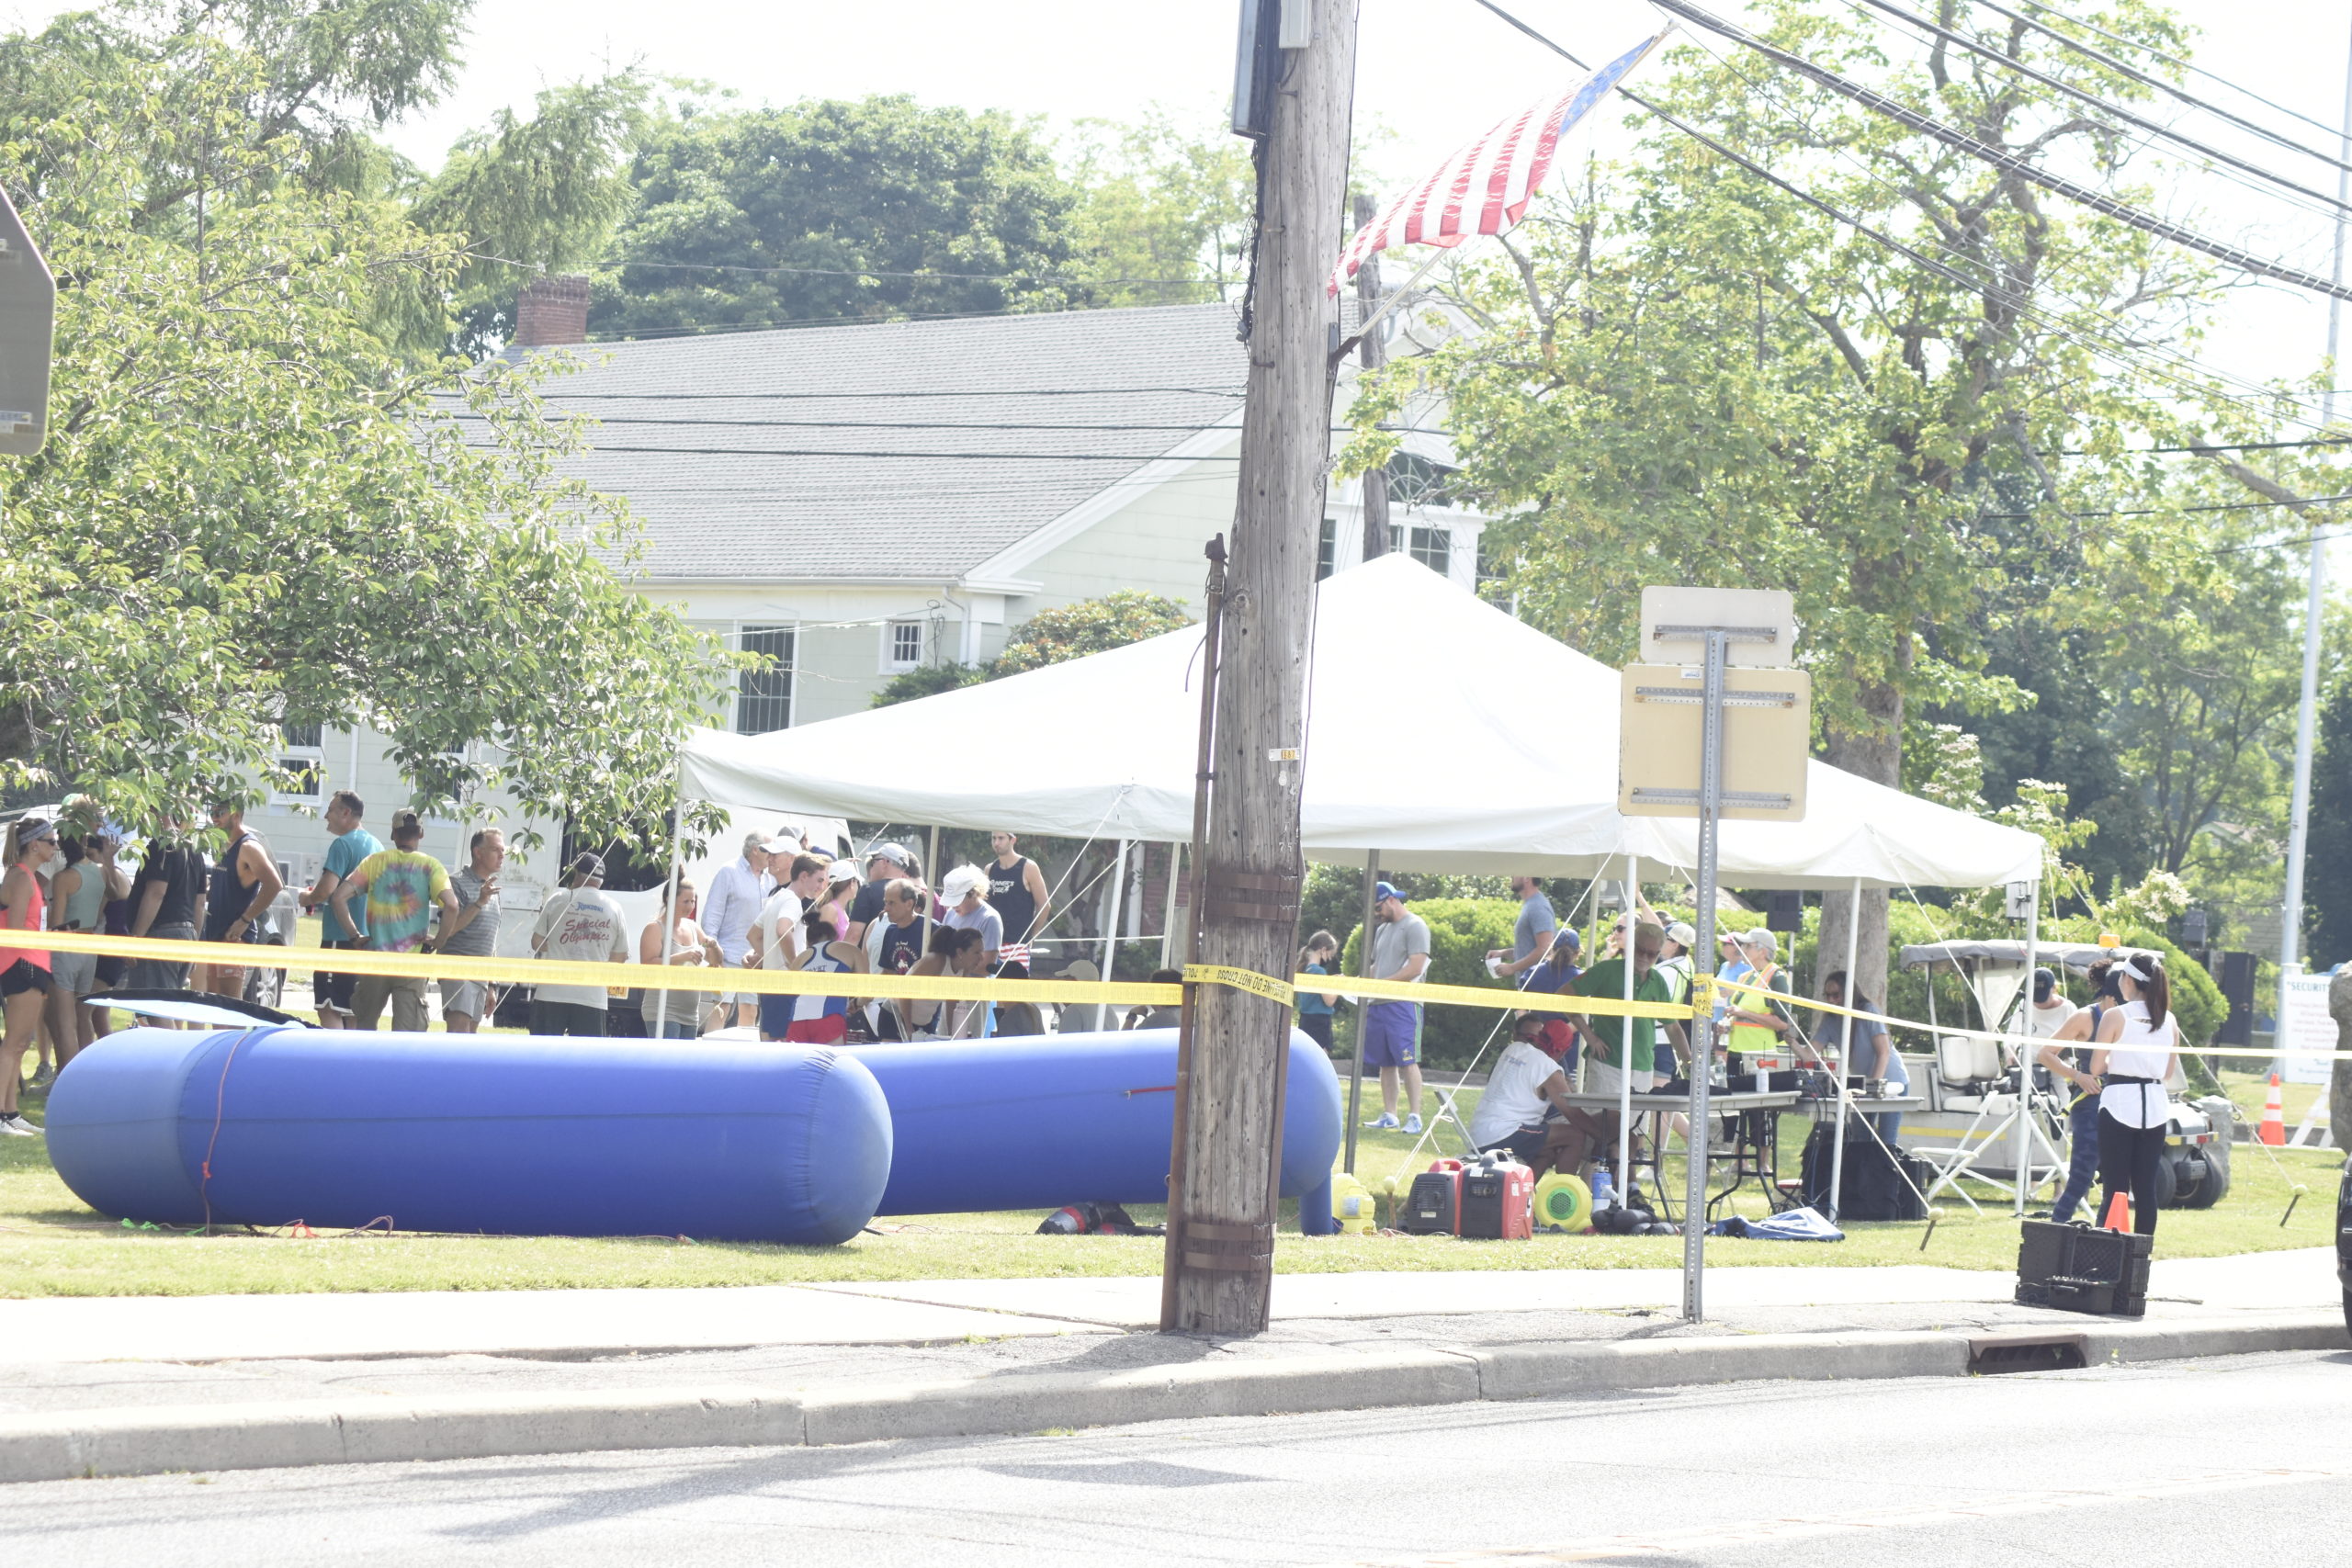 With no vendors or spectators allowed, there were less crowds at the 42nd annual Shelter Island 10K on Saturday.